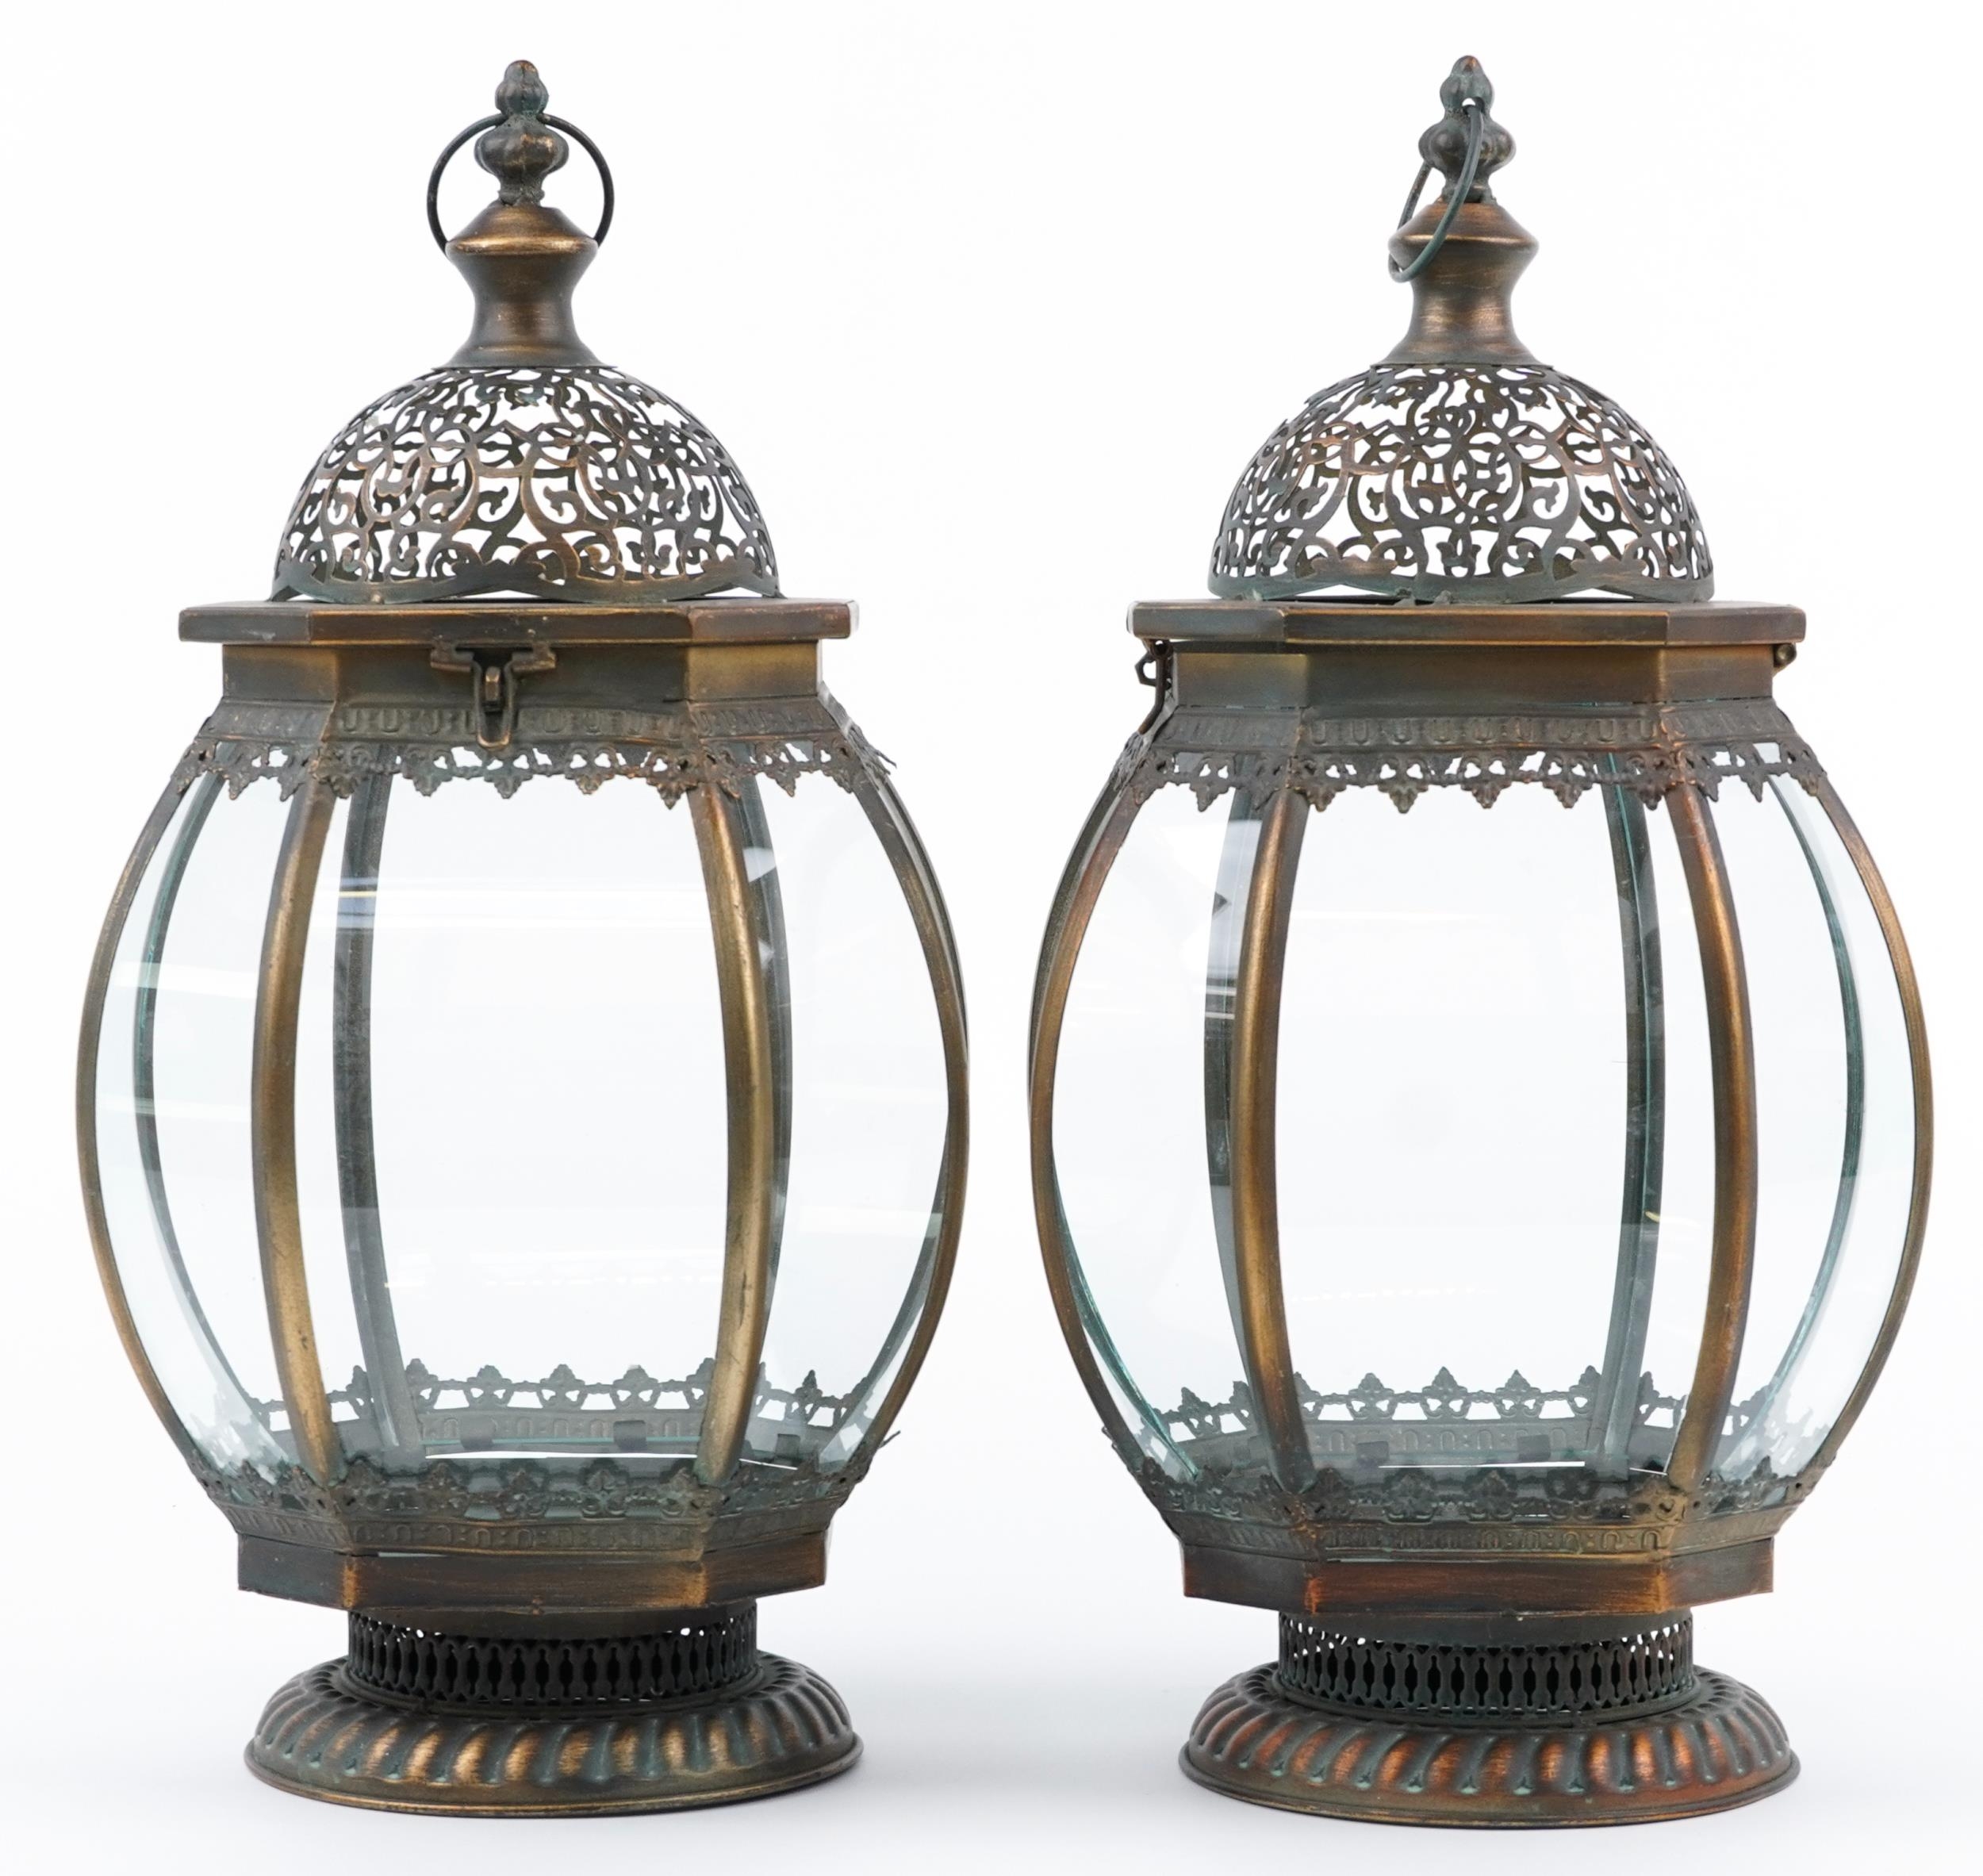 Pair of bronzed metal and glass hanging lanterns, 52cm high : For further information on this lot